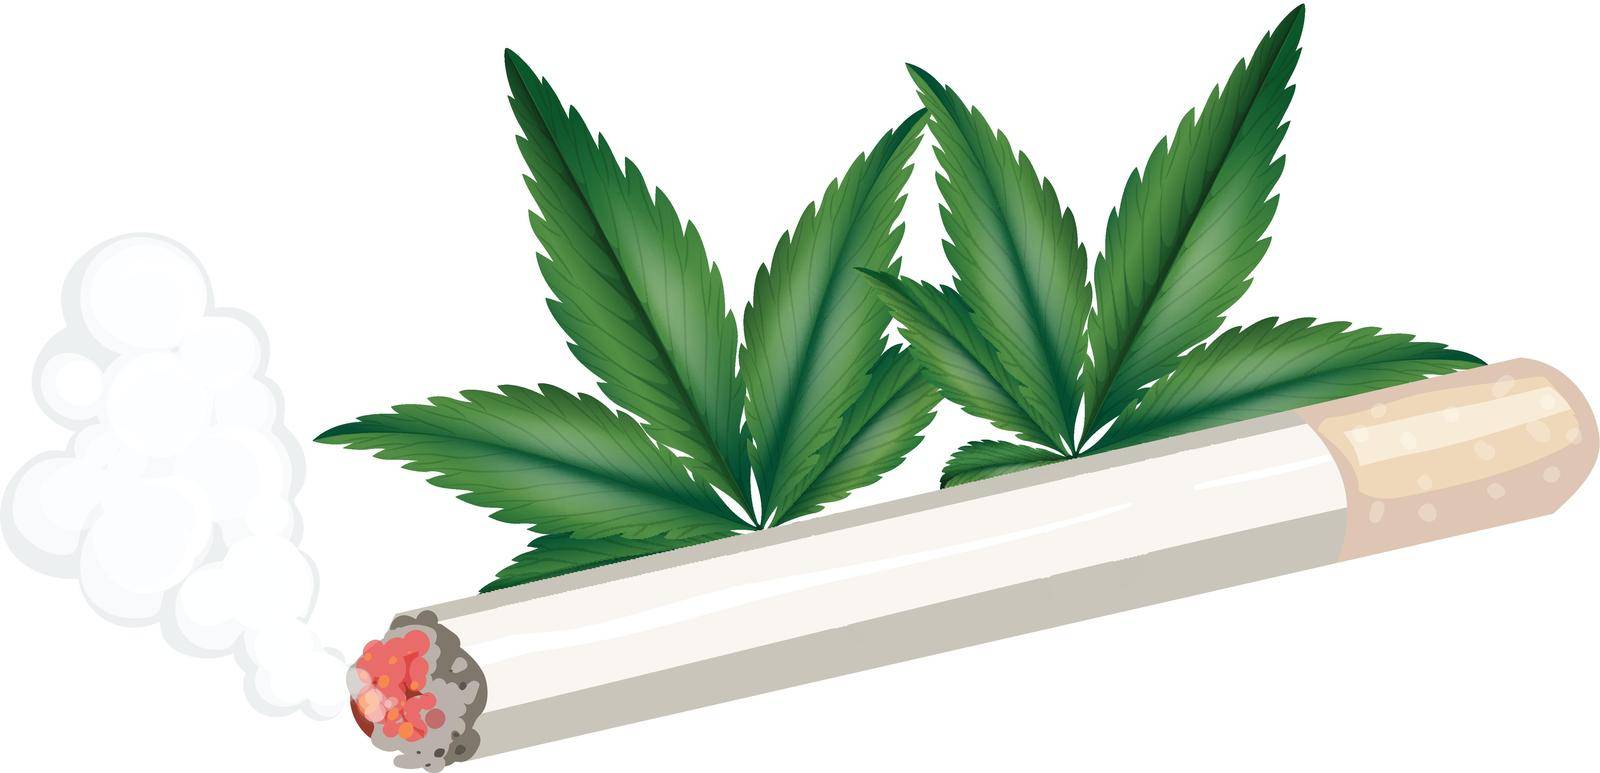 A joint of weed illustration